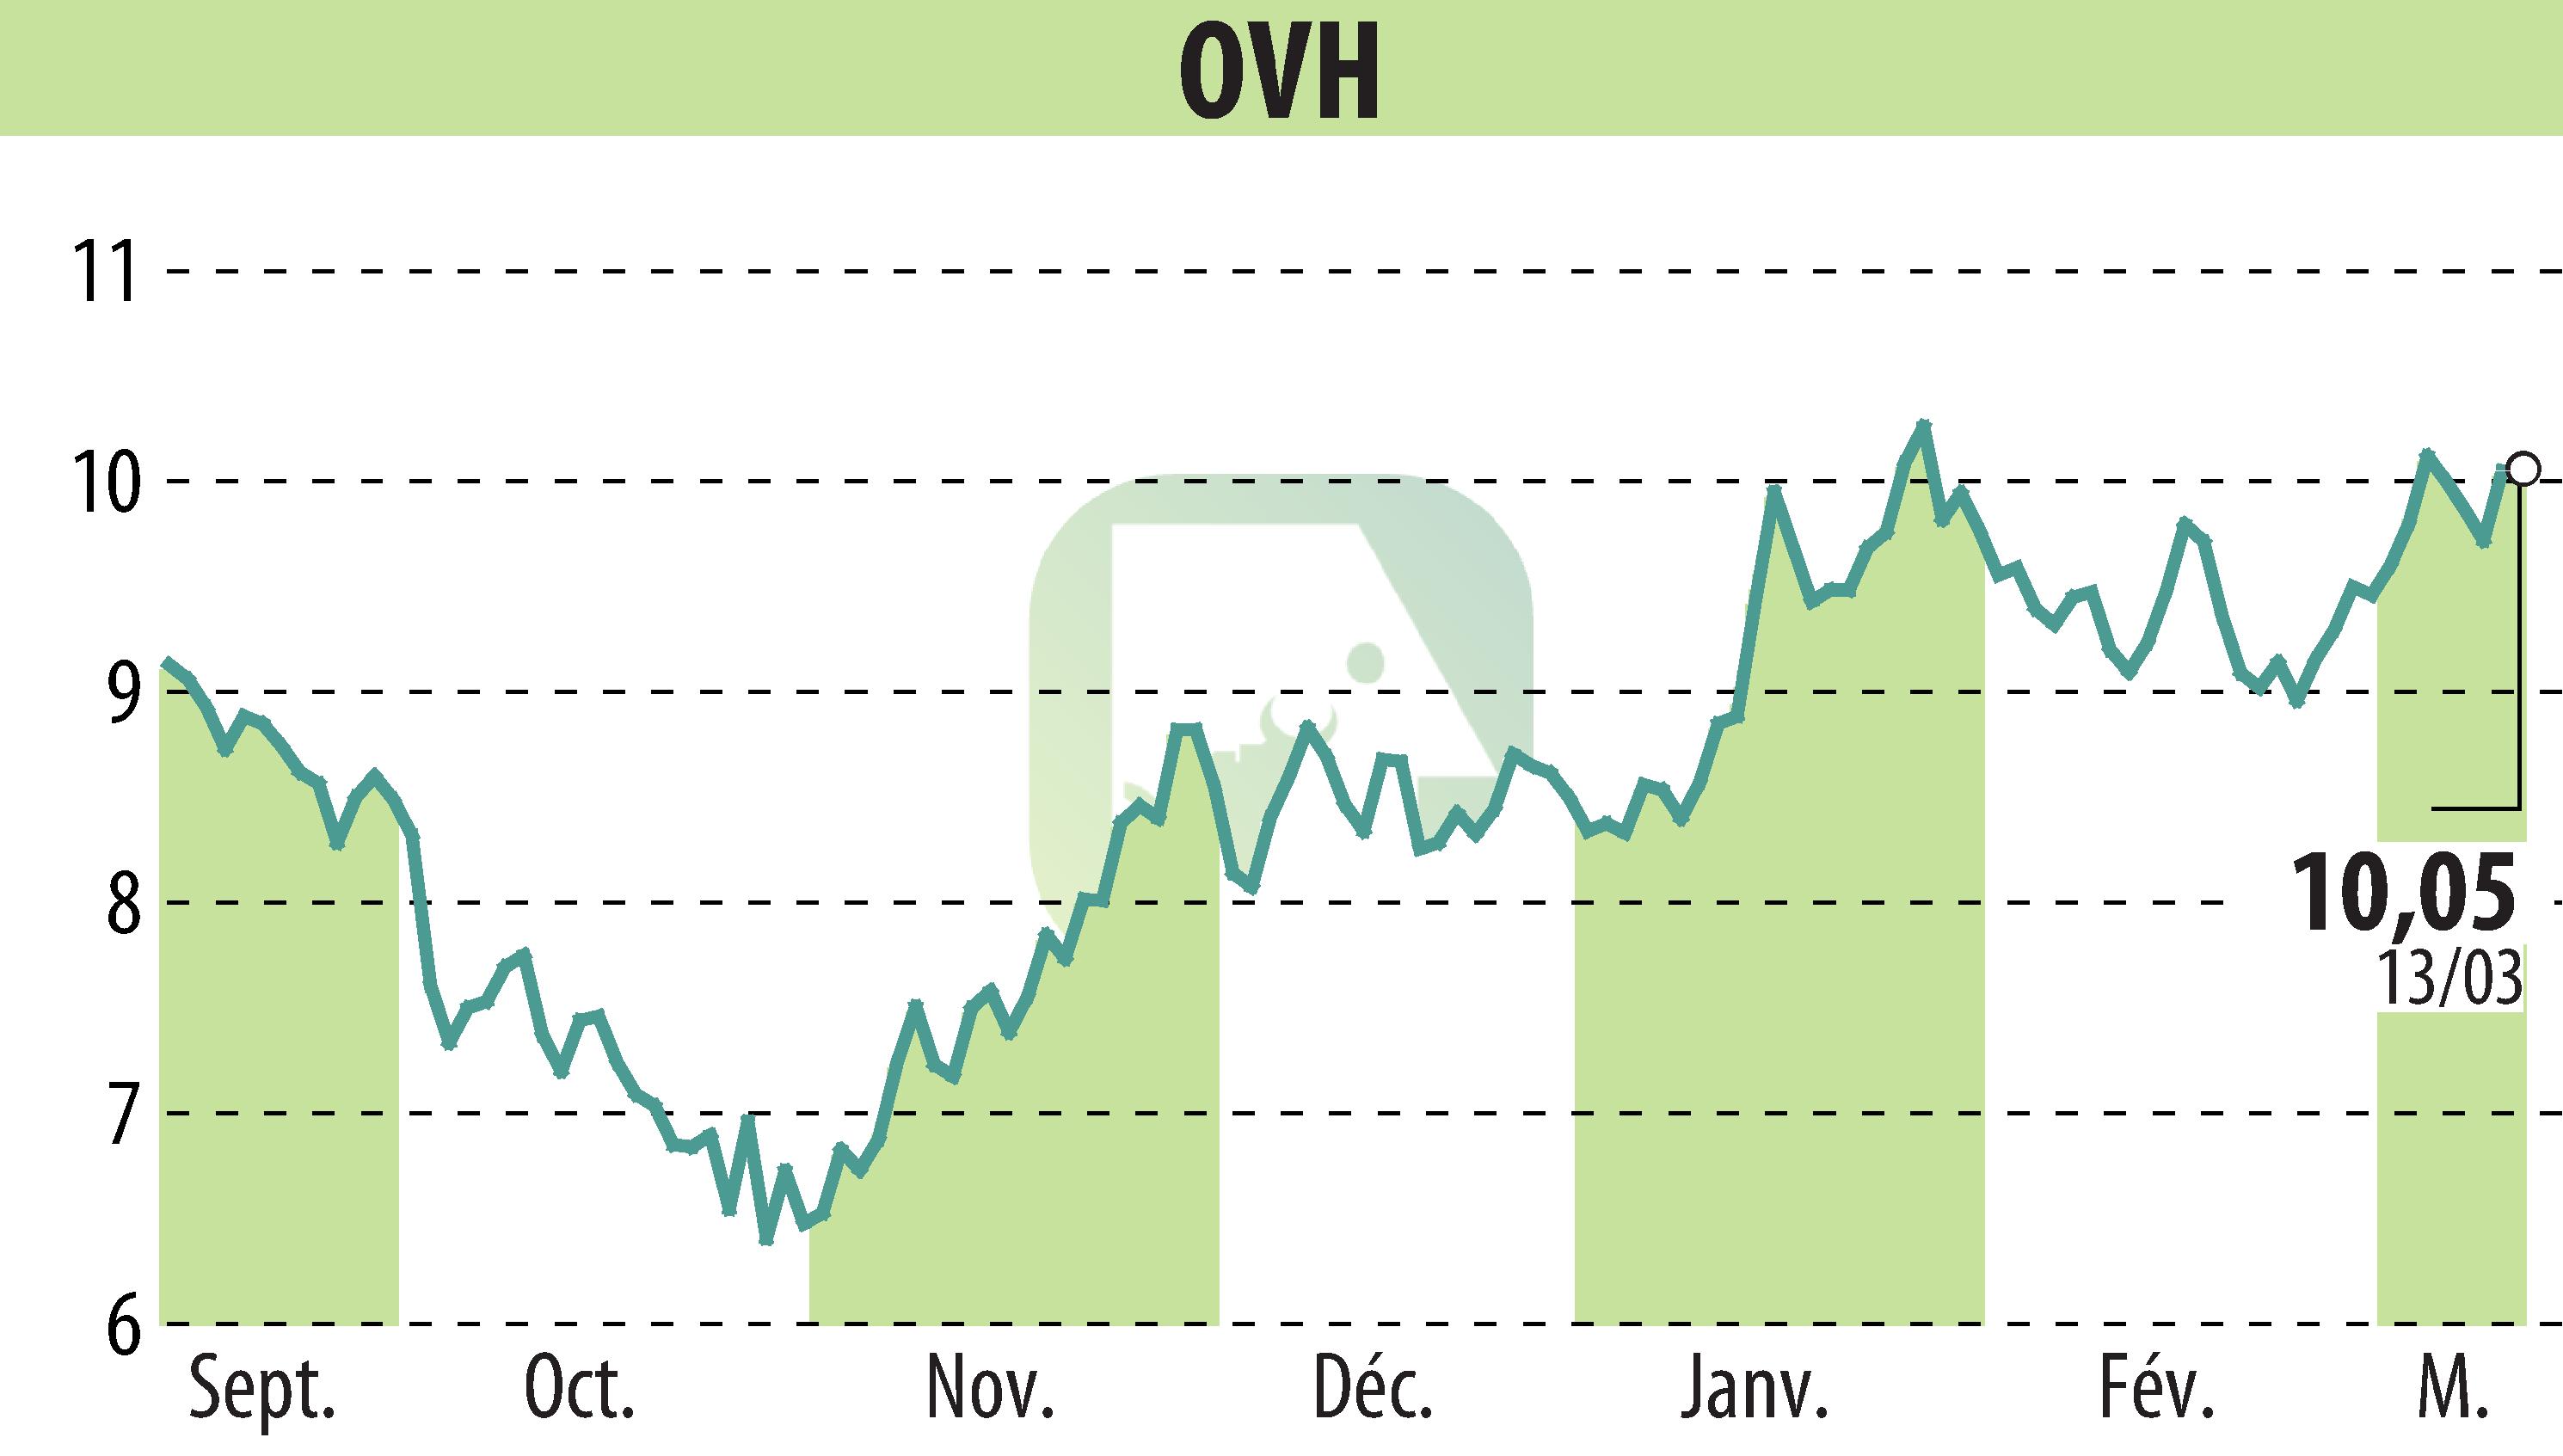 Stock price chart of OVH (EPA:OVH) showing fluctuations.